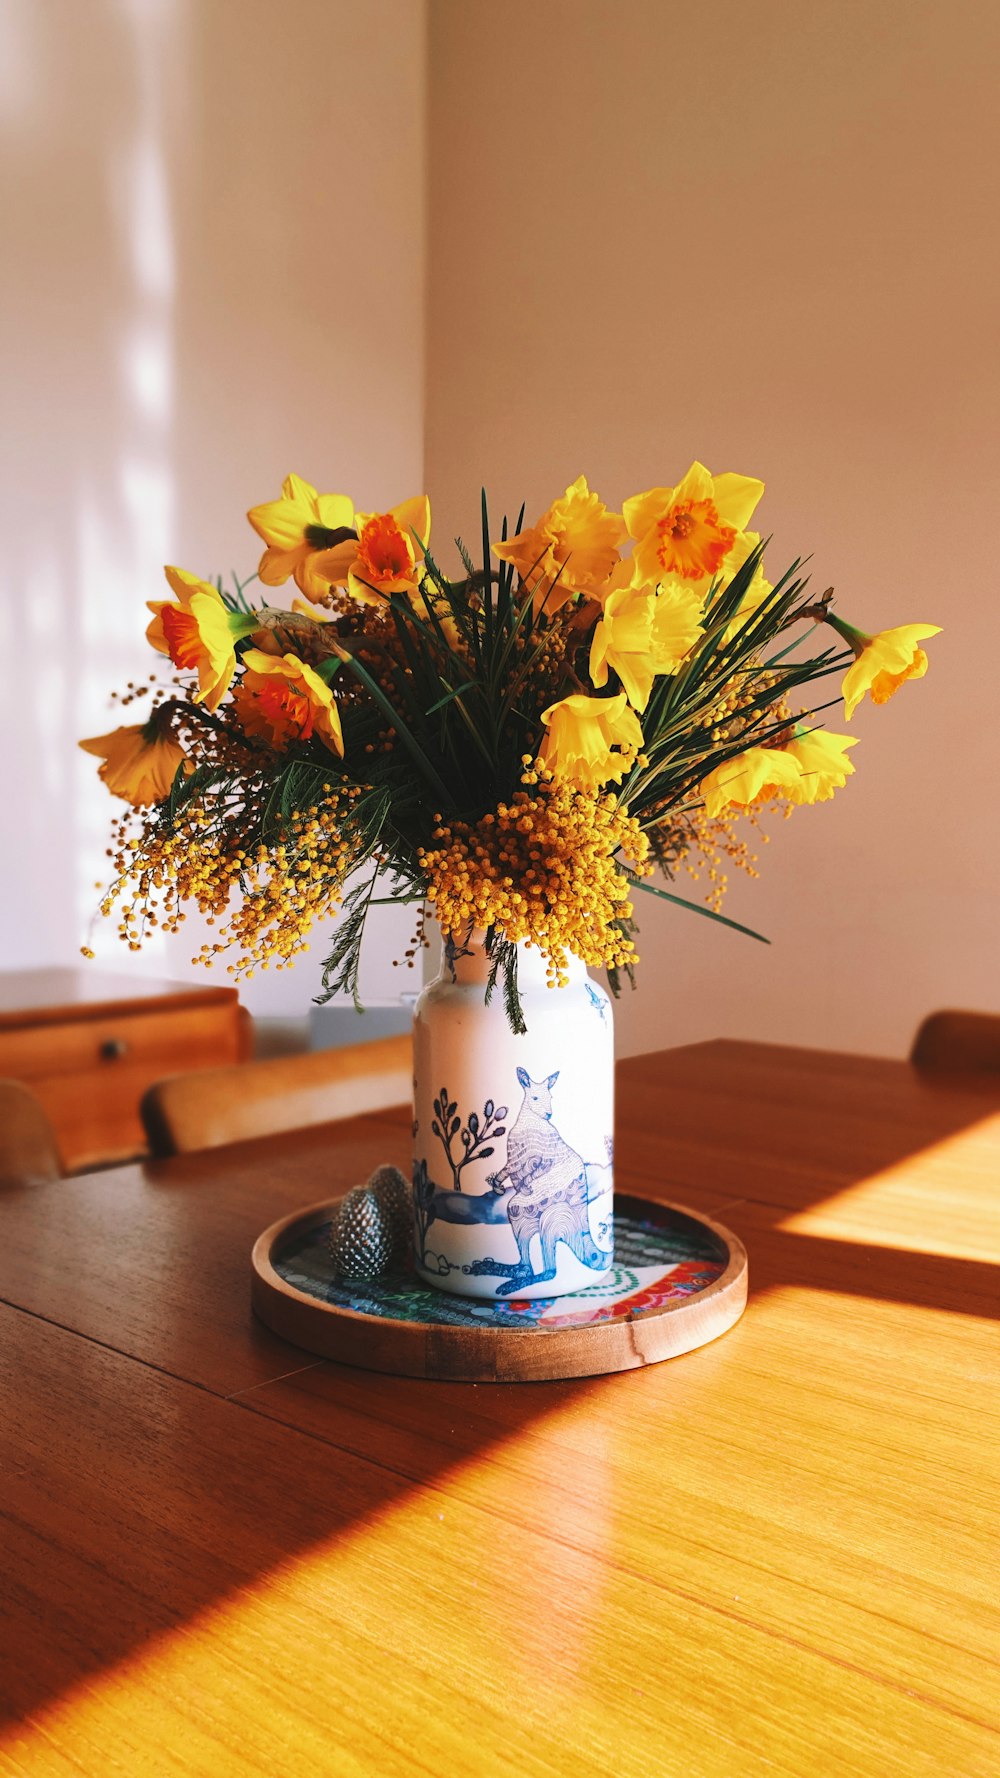 yellow petaled flowers on a vase